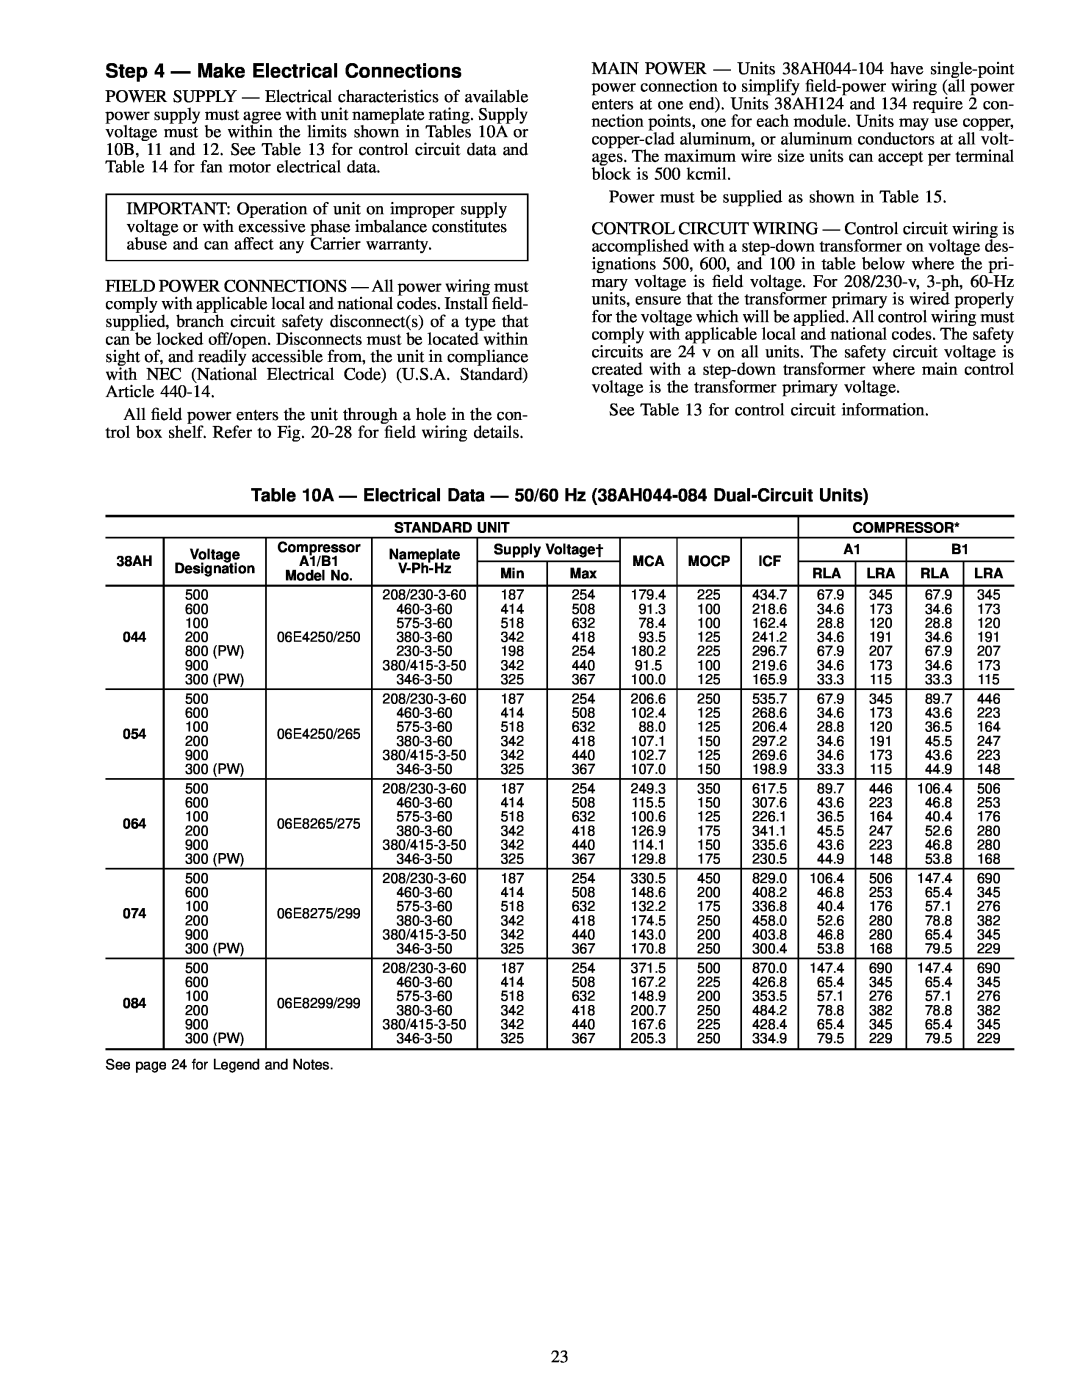 Carrier 38AH044-084 specifications Ð Make Electrical Connections 